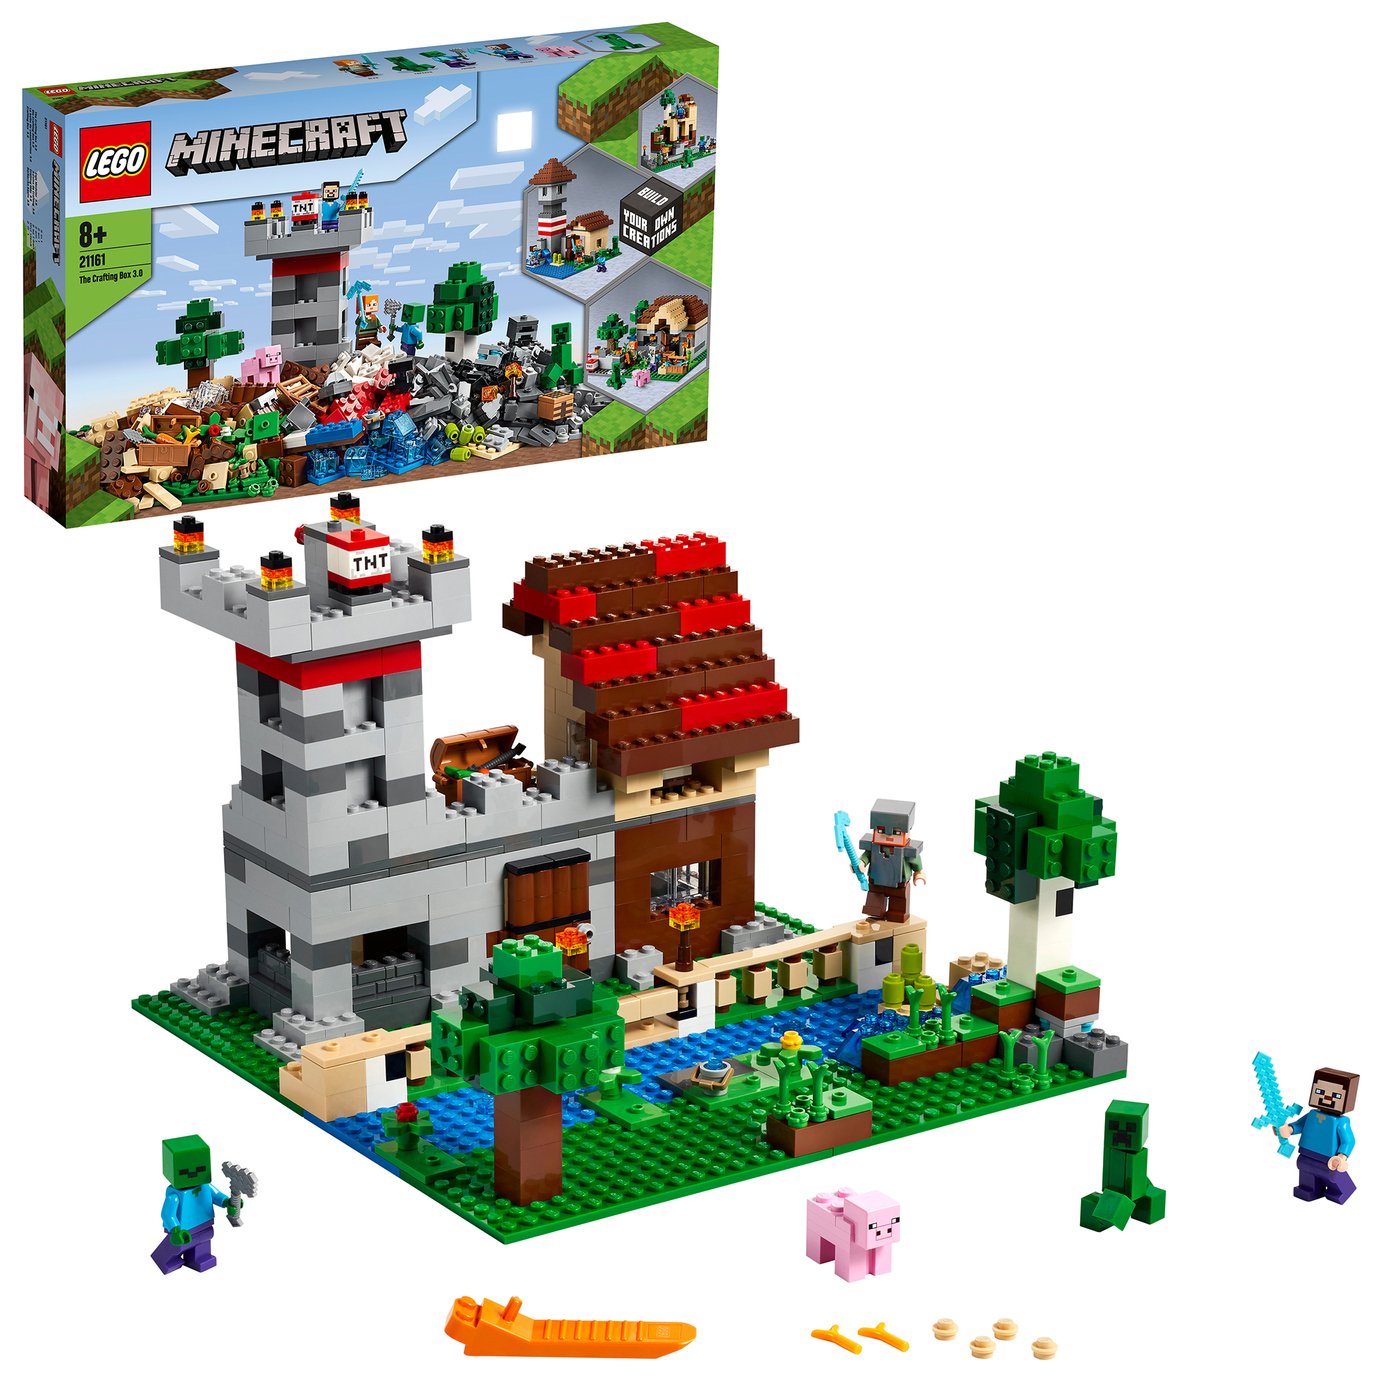 LEGO Minecraft The Crafting Box 3.0 Fortress Farm Set- 21161 Review